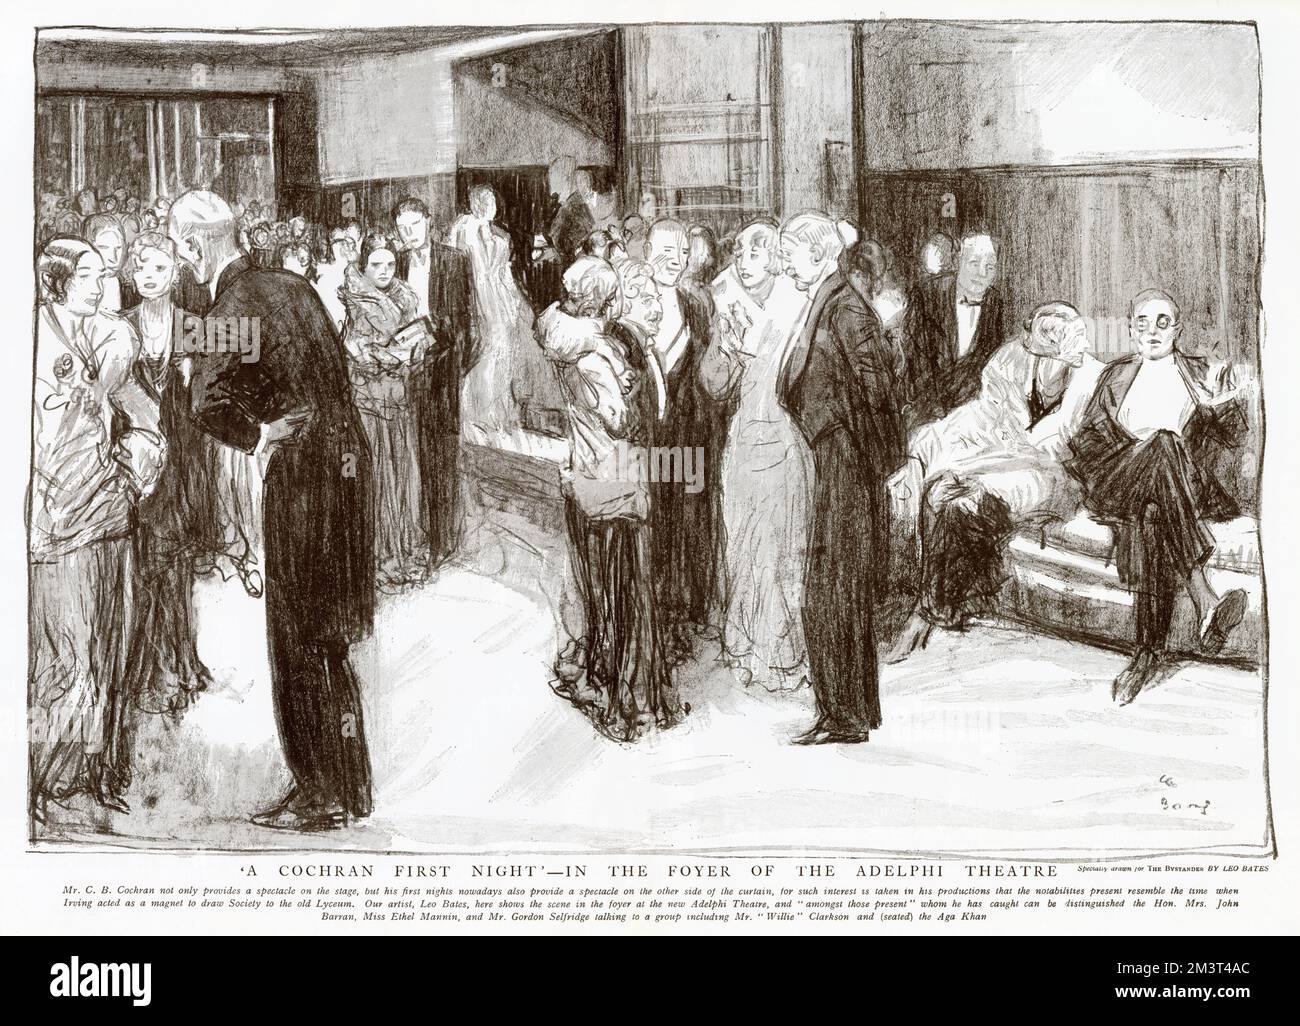 Scene in the foyer of the Adelphi Theatre with notable celebrities present for the first night of one of impresario Charles Cochran's shows. Among those present is the Hon. Mrs John Barran, Miss Ethel Mannin, Gordon Selfridge, on the right of the centre group, talking to wig and theatrical costumier Willie Clarkson, and, seated, the Aga Khan. Stock Photo